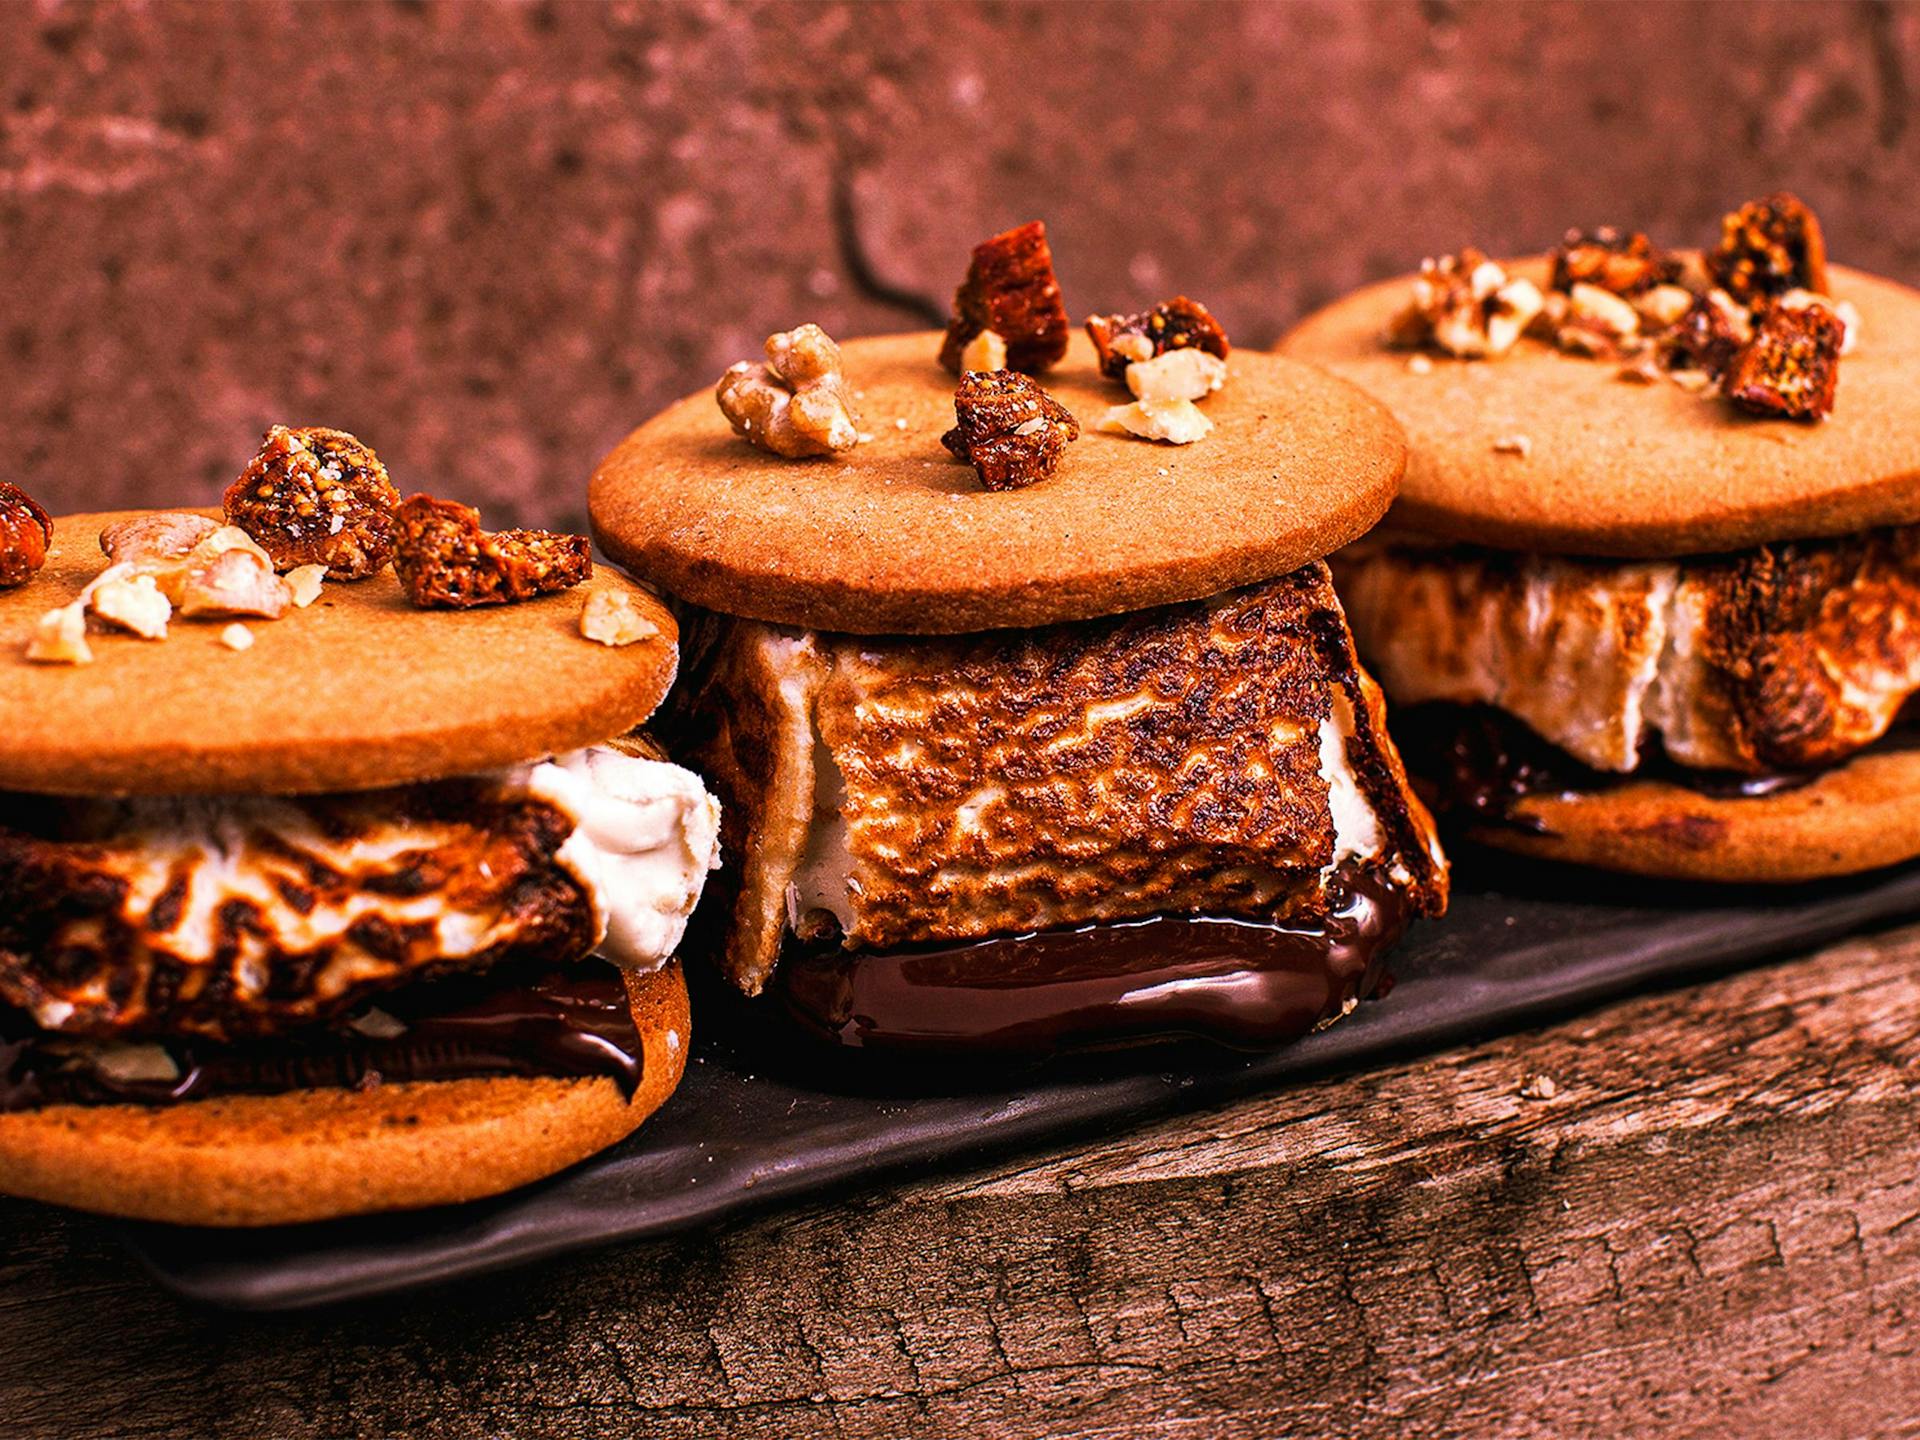 Three big smores overflowing with marshmallow sit atop a wooden log